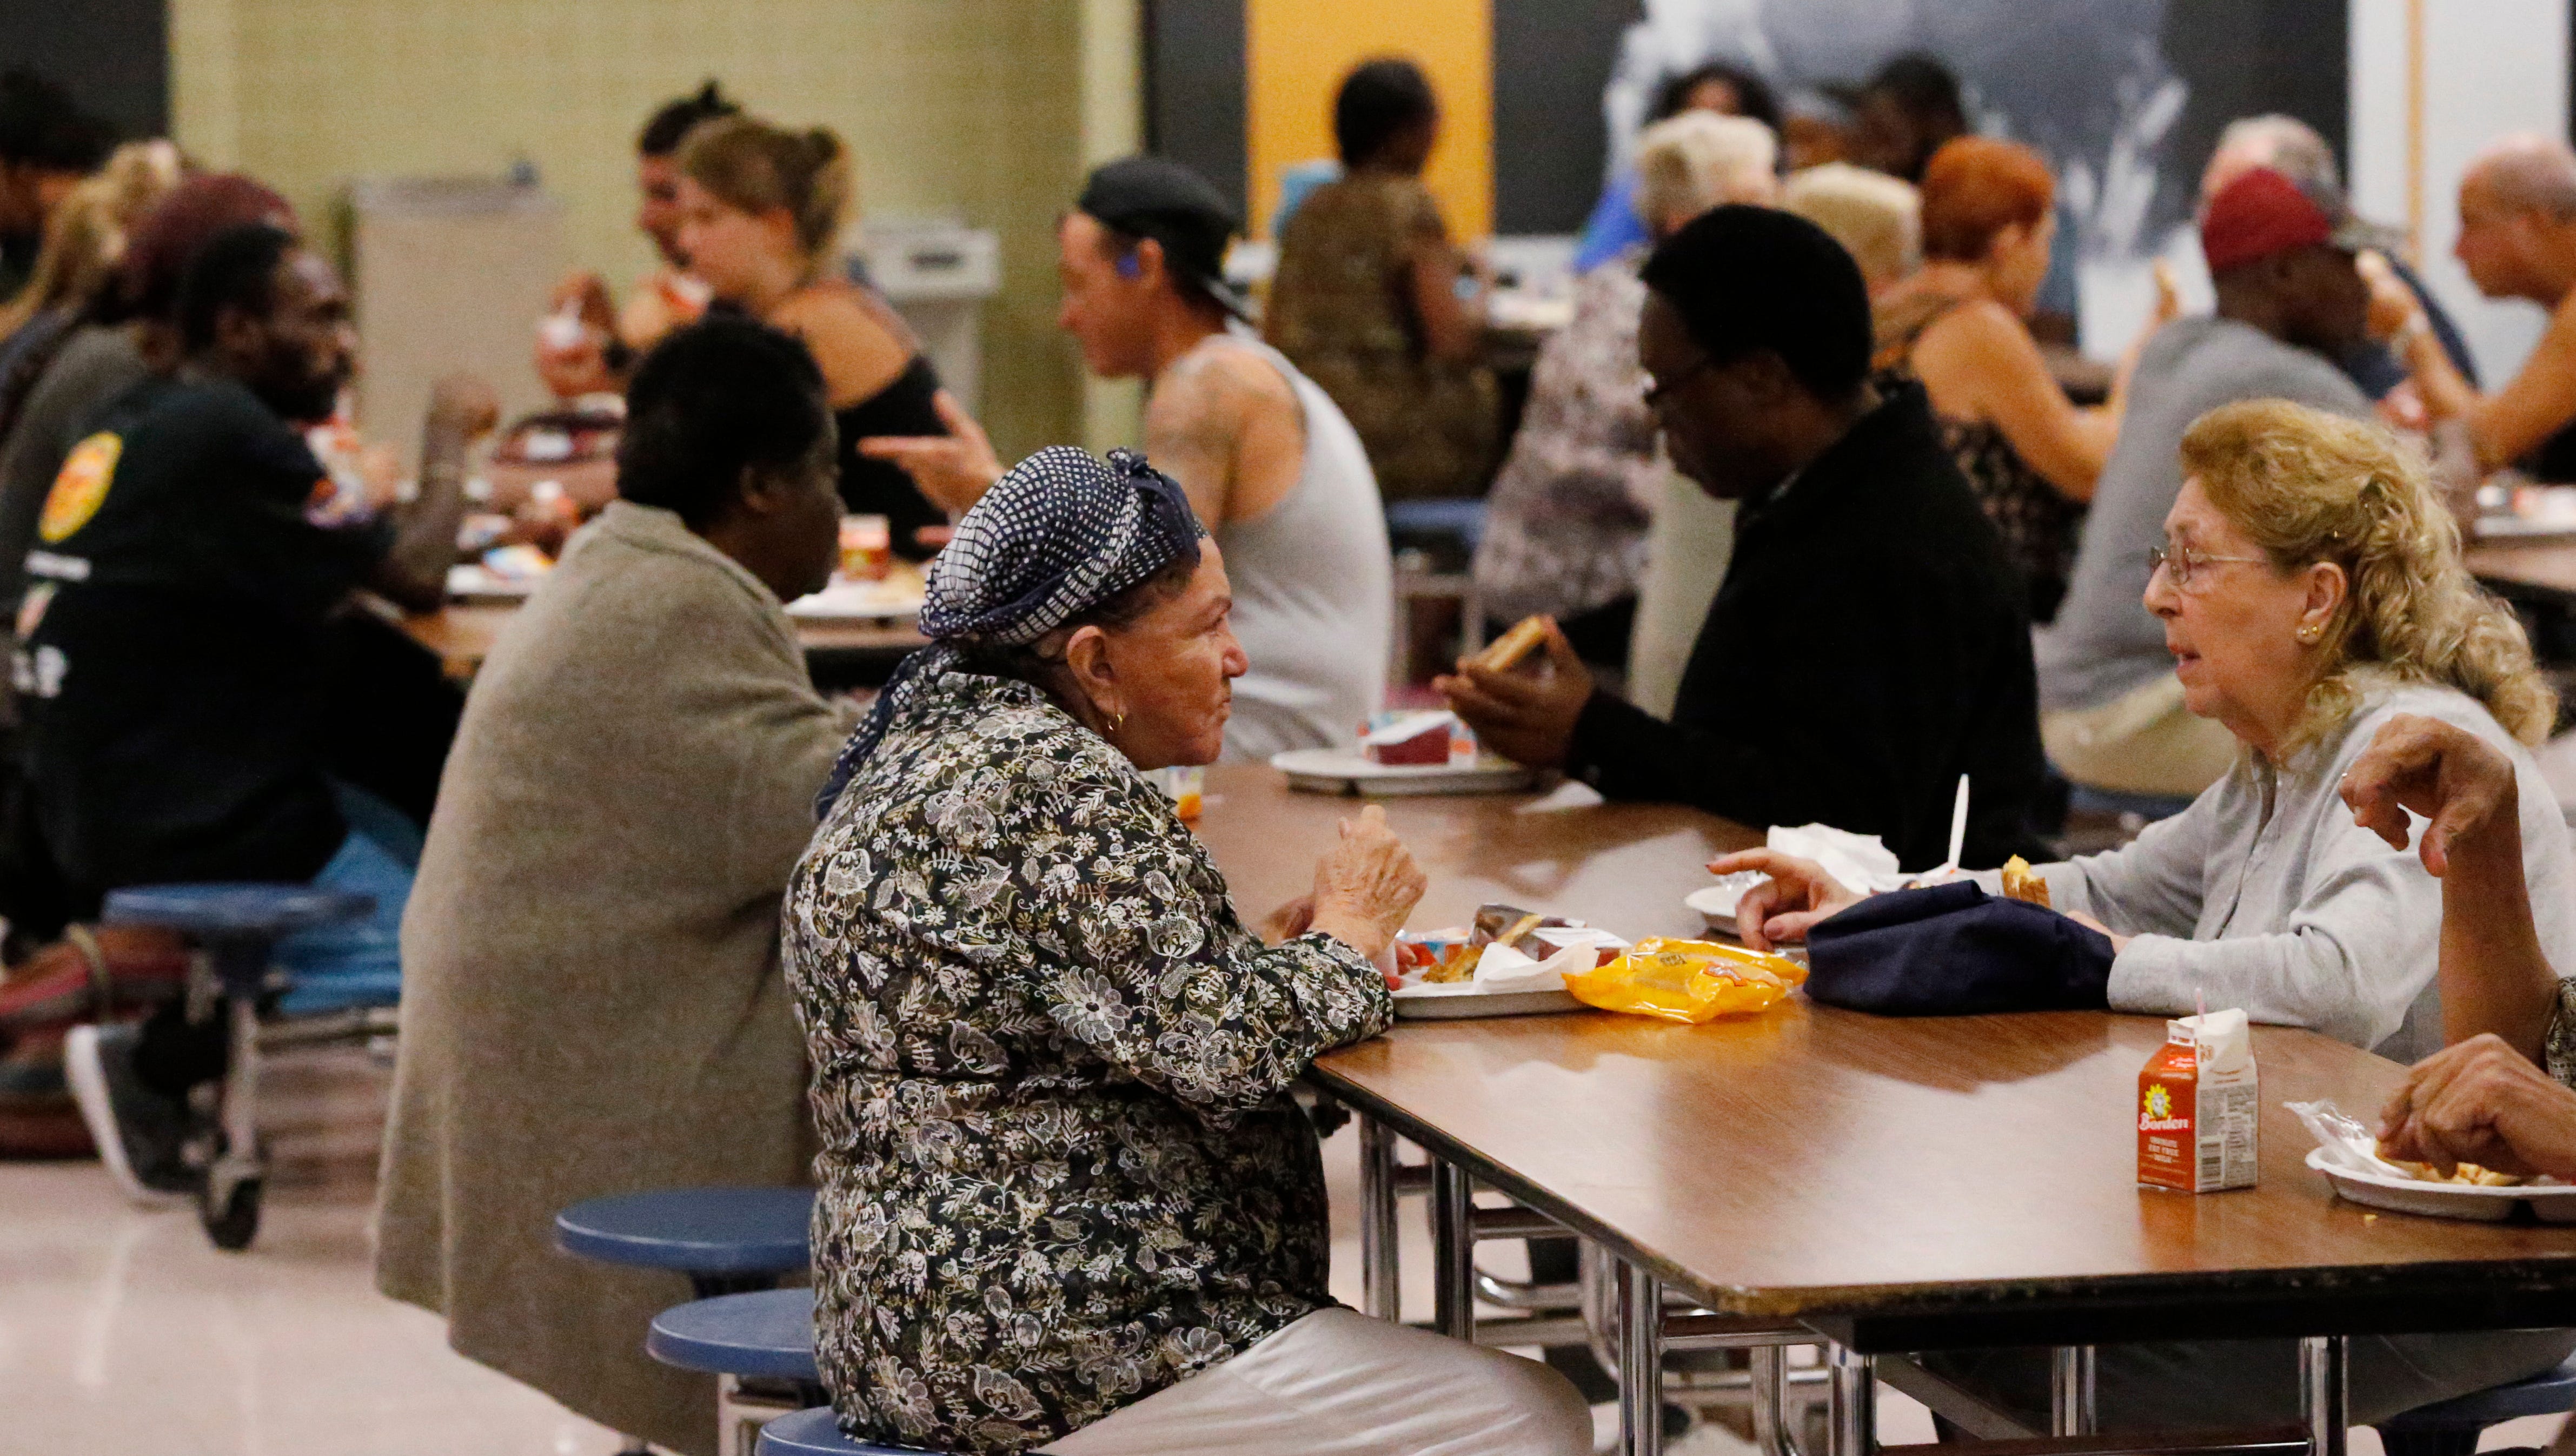 Florida Naacp Wants Checks For Warrants Scrapped At Hurricane Shelters